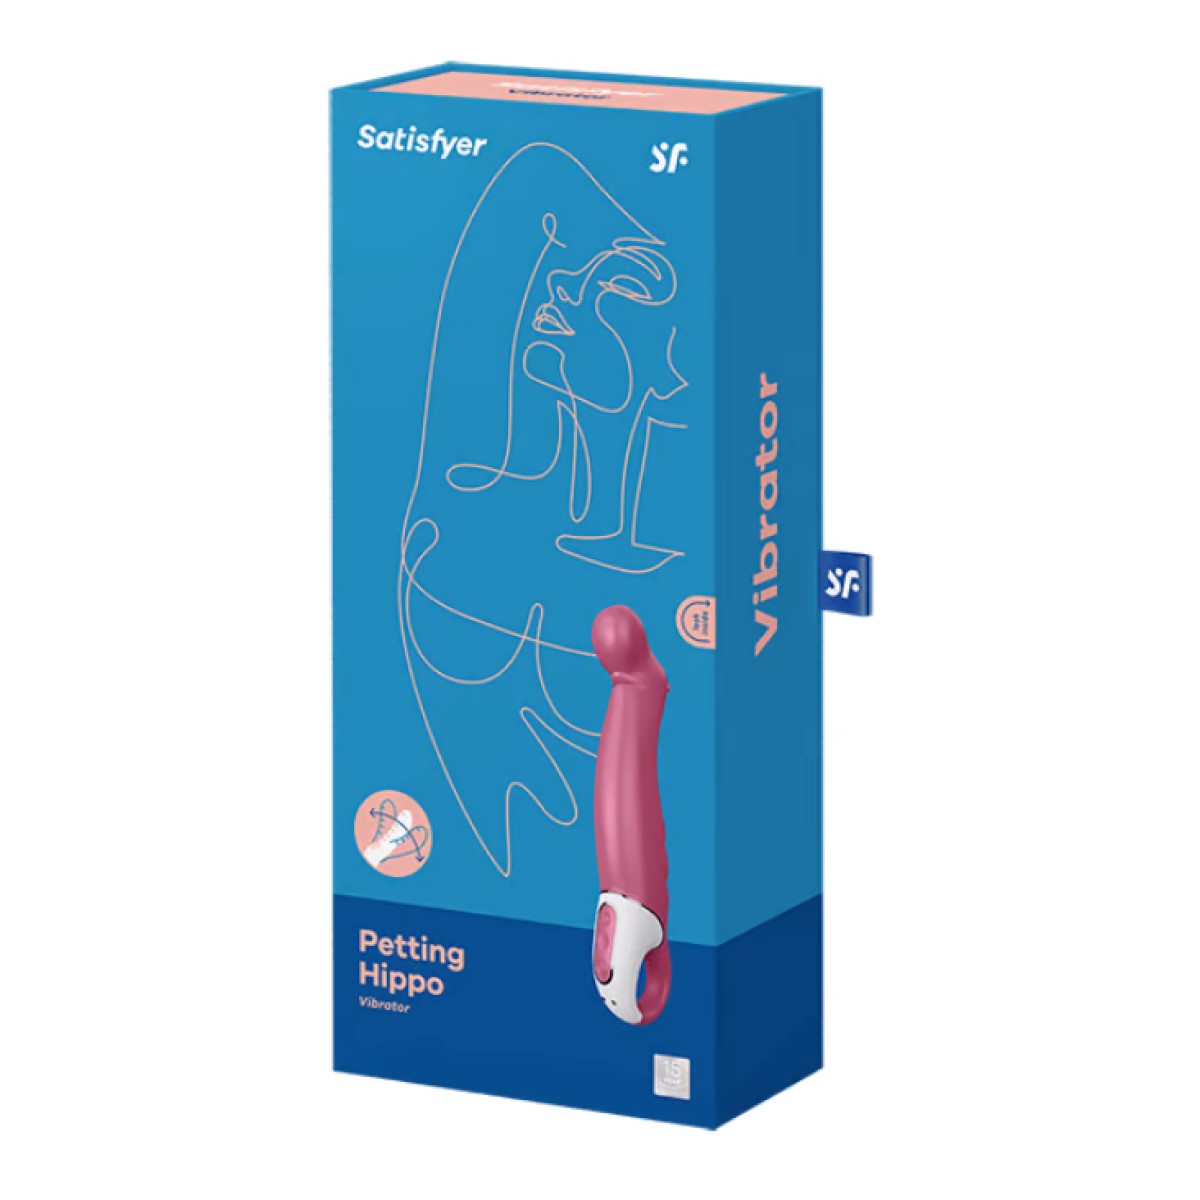 Petting Hippo by Satisfyer